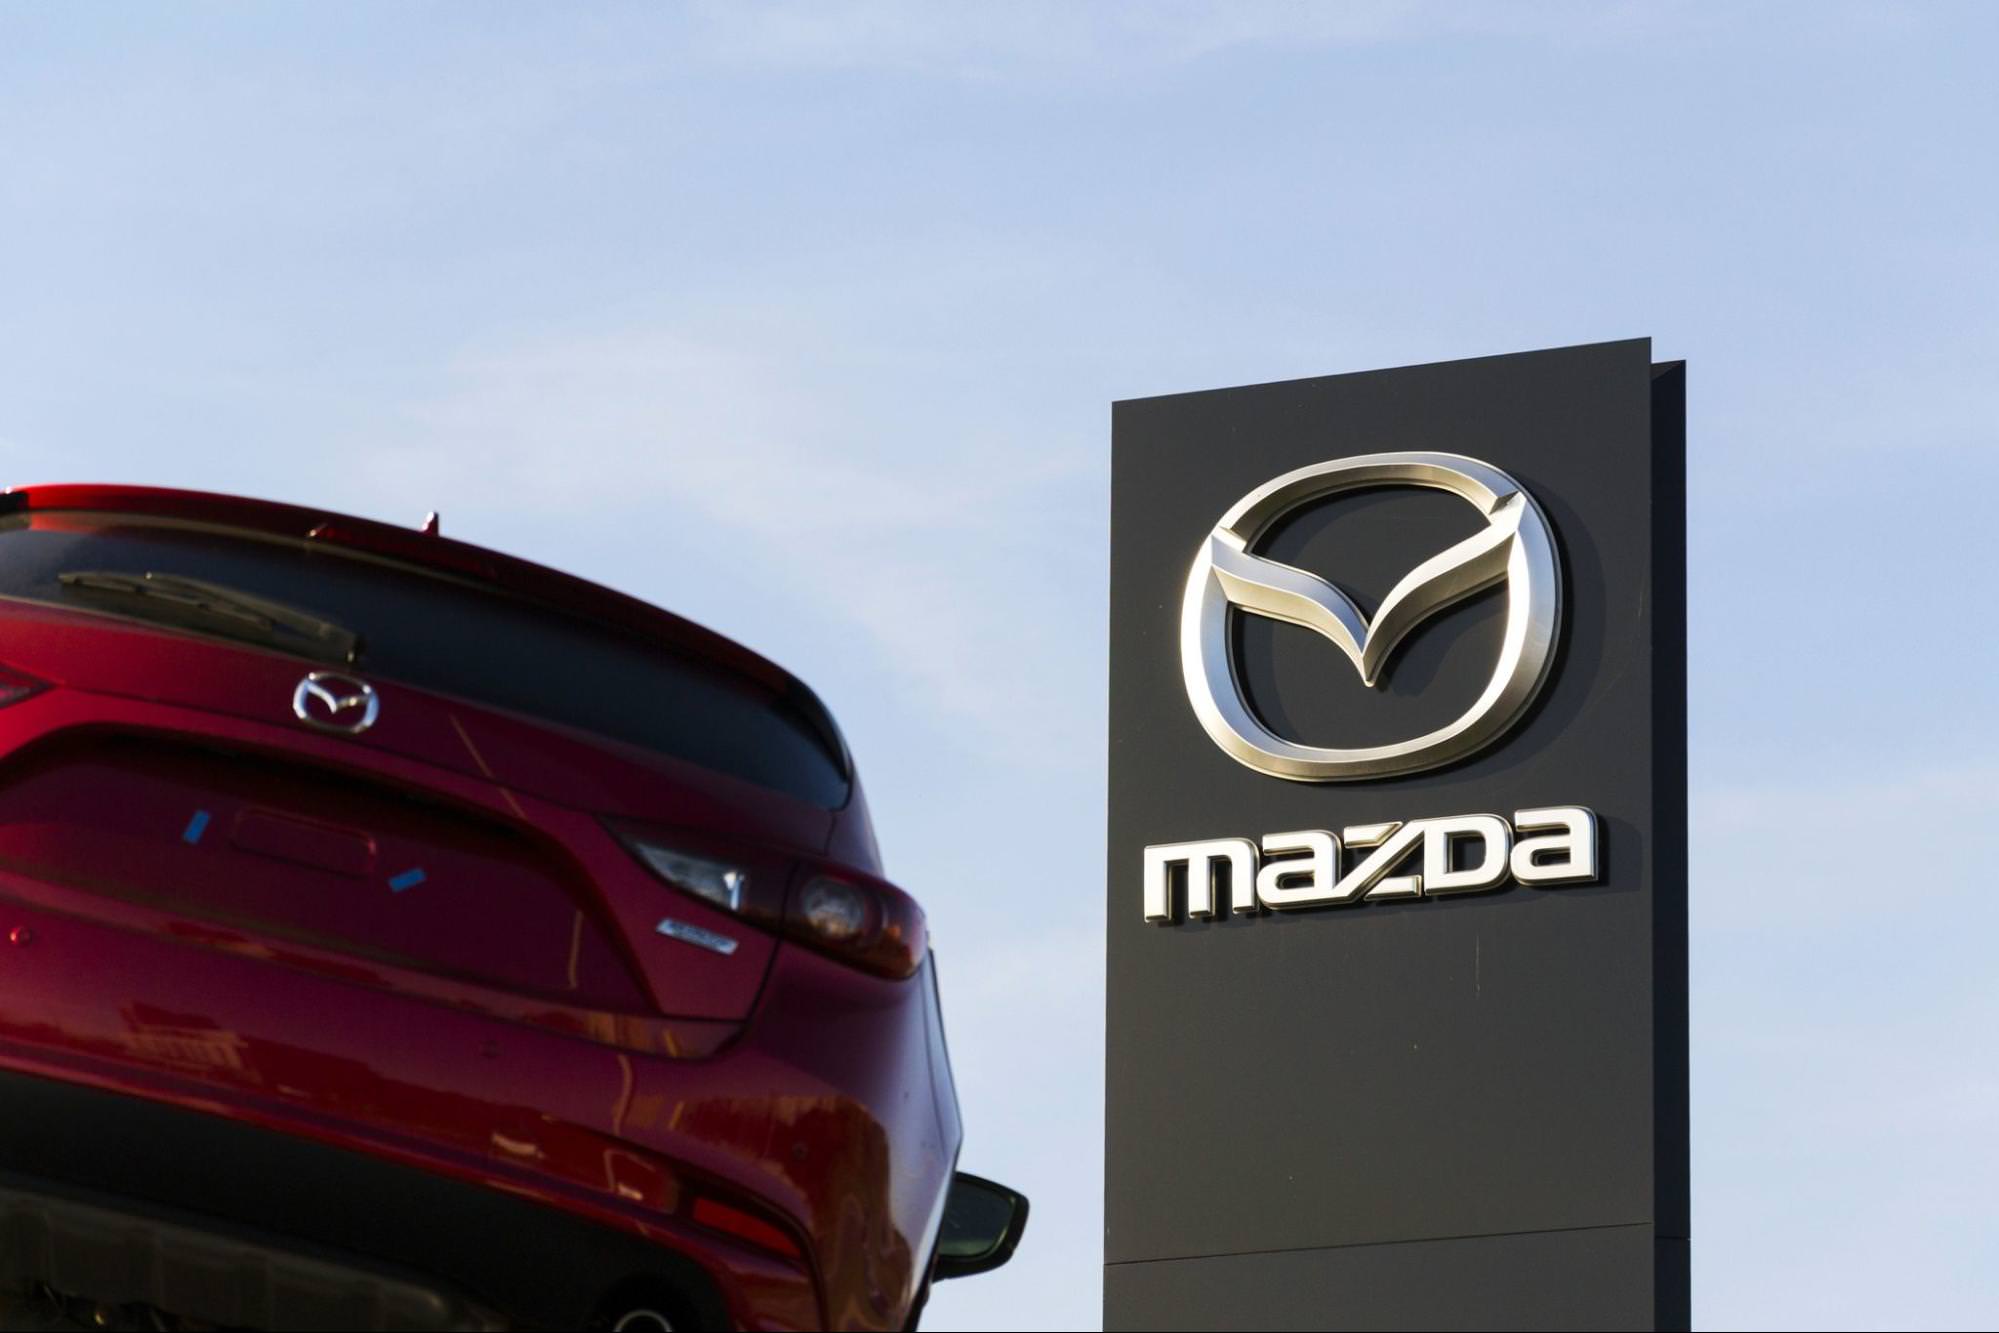 view of the mazda logo on a car and in the background